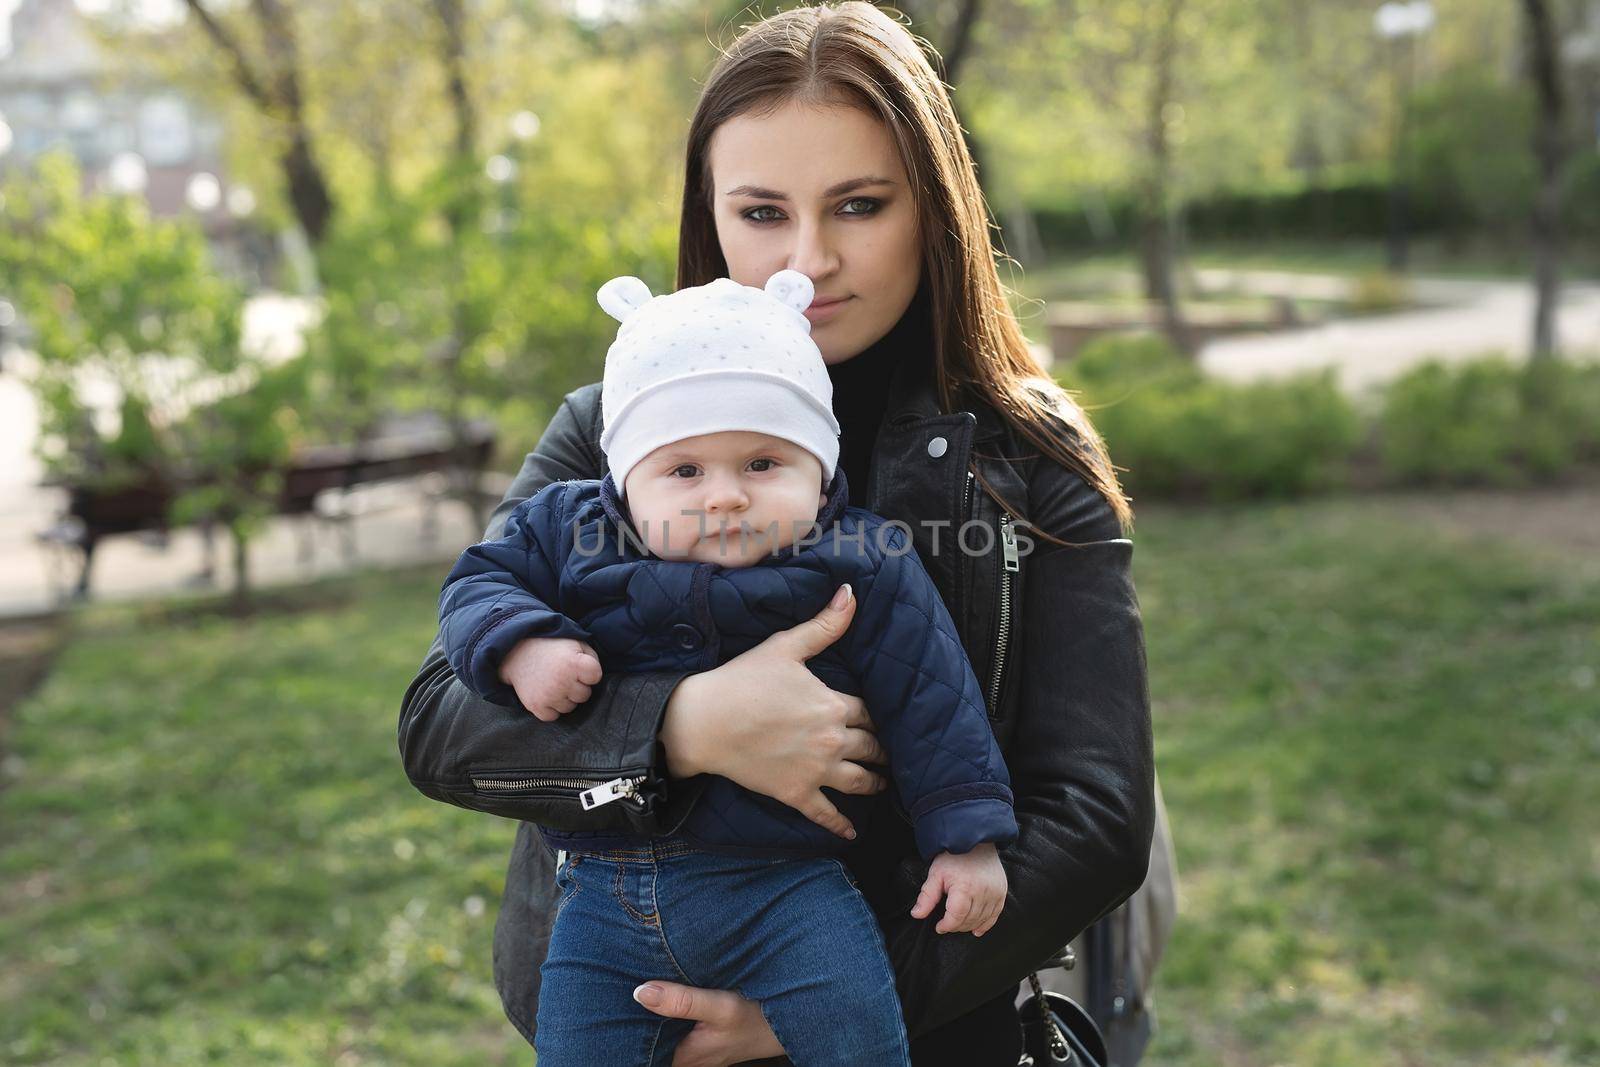 Mom and son with a small child are walking in a spring forest or park